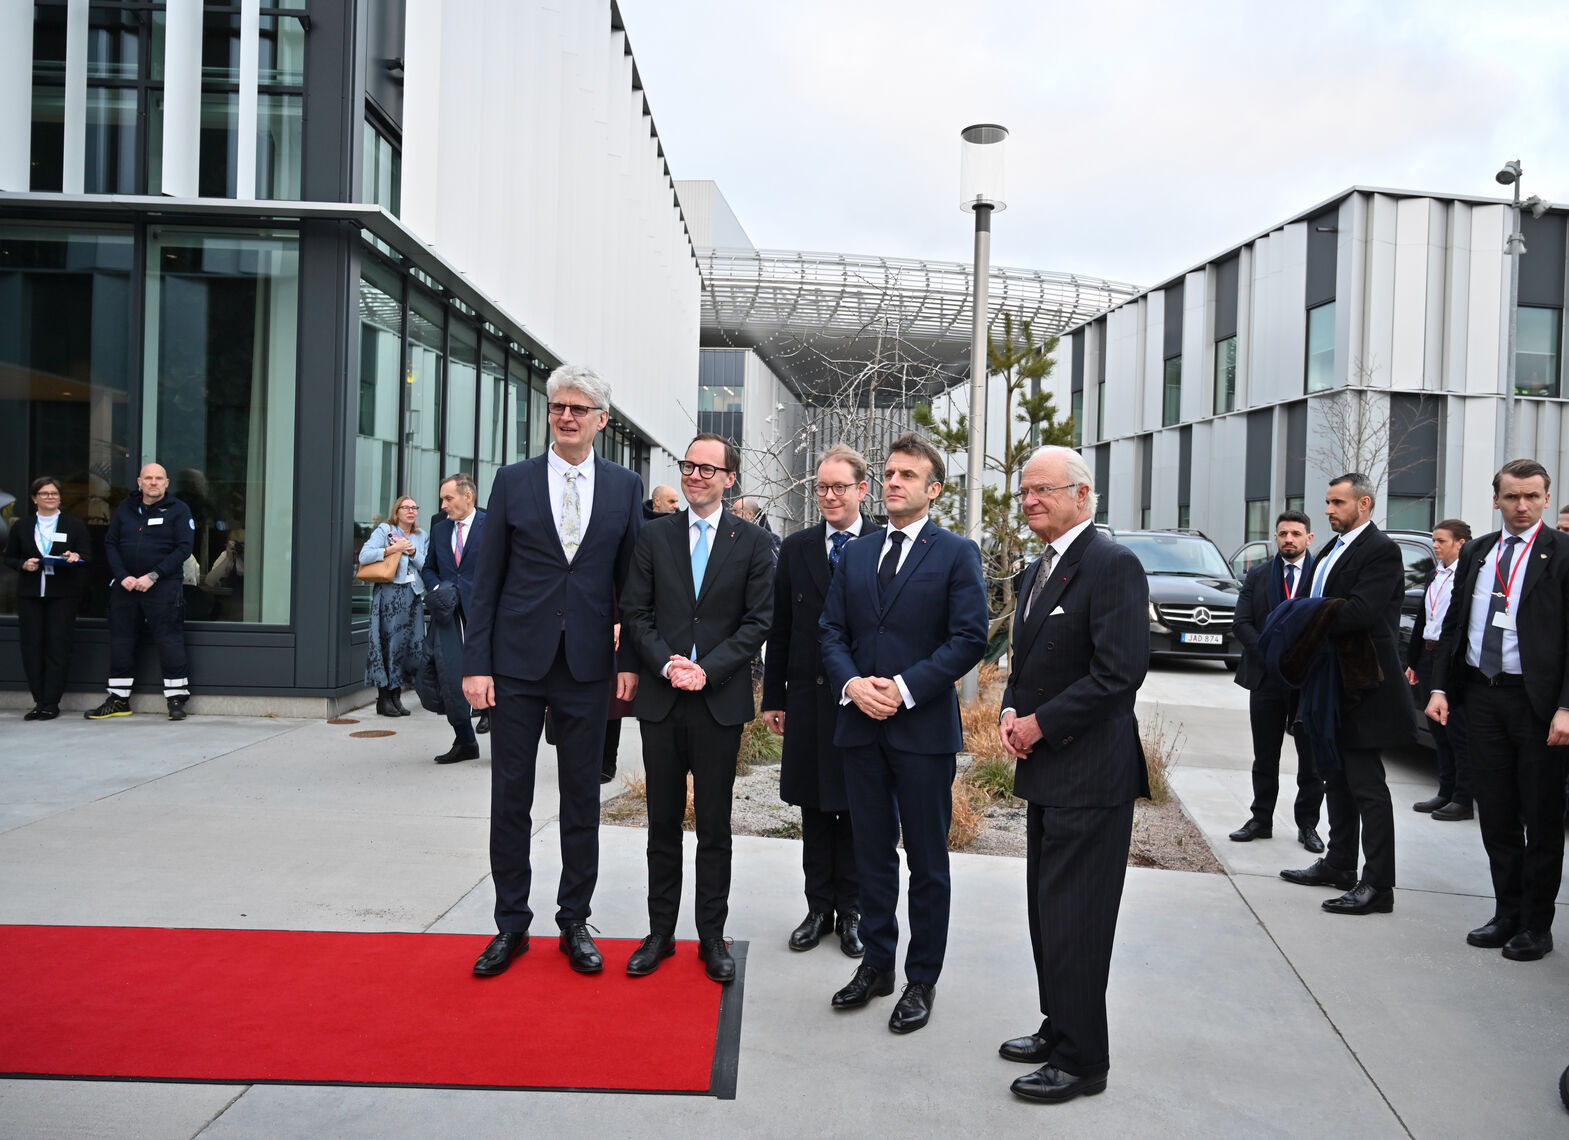 ESS Director General Helmut Schober stands to the left of the King of Sweden, French President Emmanuel Macron, Swedish Minister of Education Mats Persson and Minister of Foreign Affairs Tobias Billström, by a red carpet outside the shiny glass office buildings of ESS